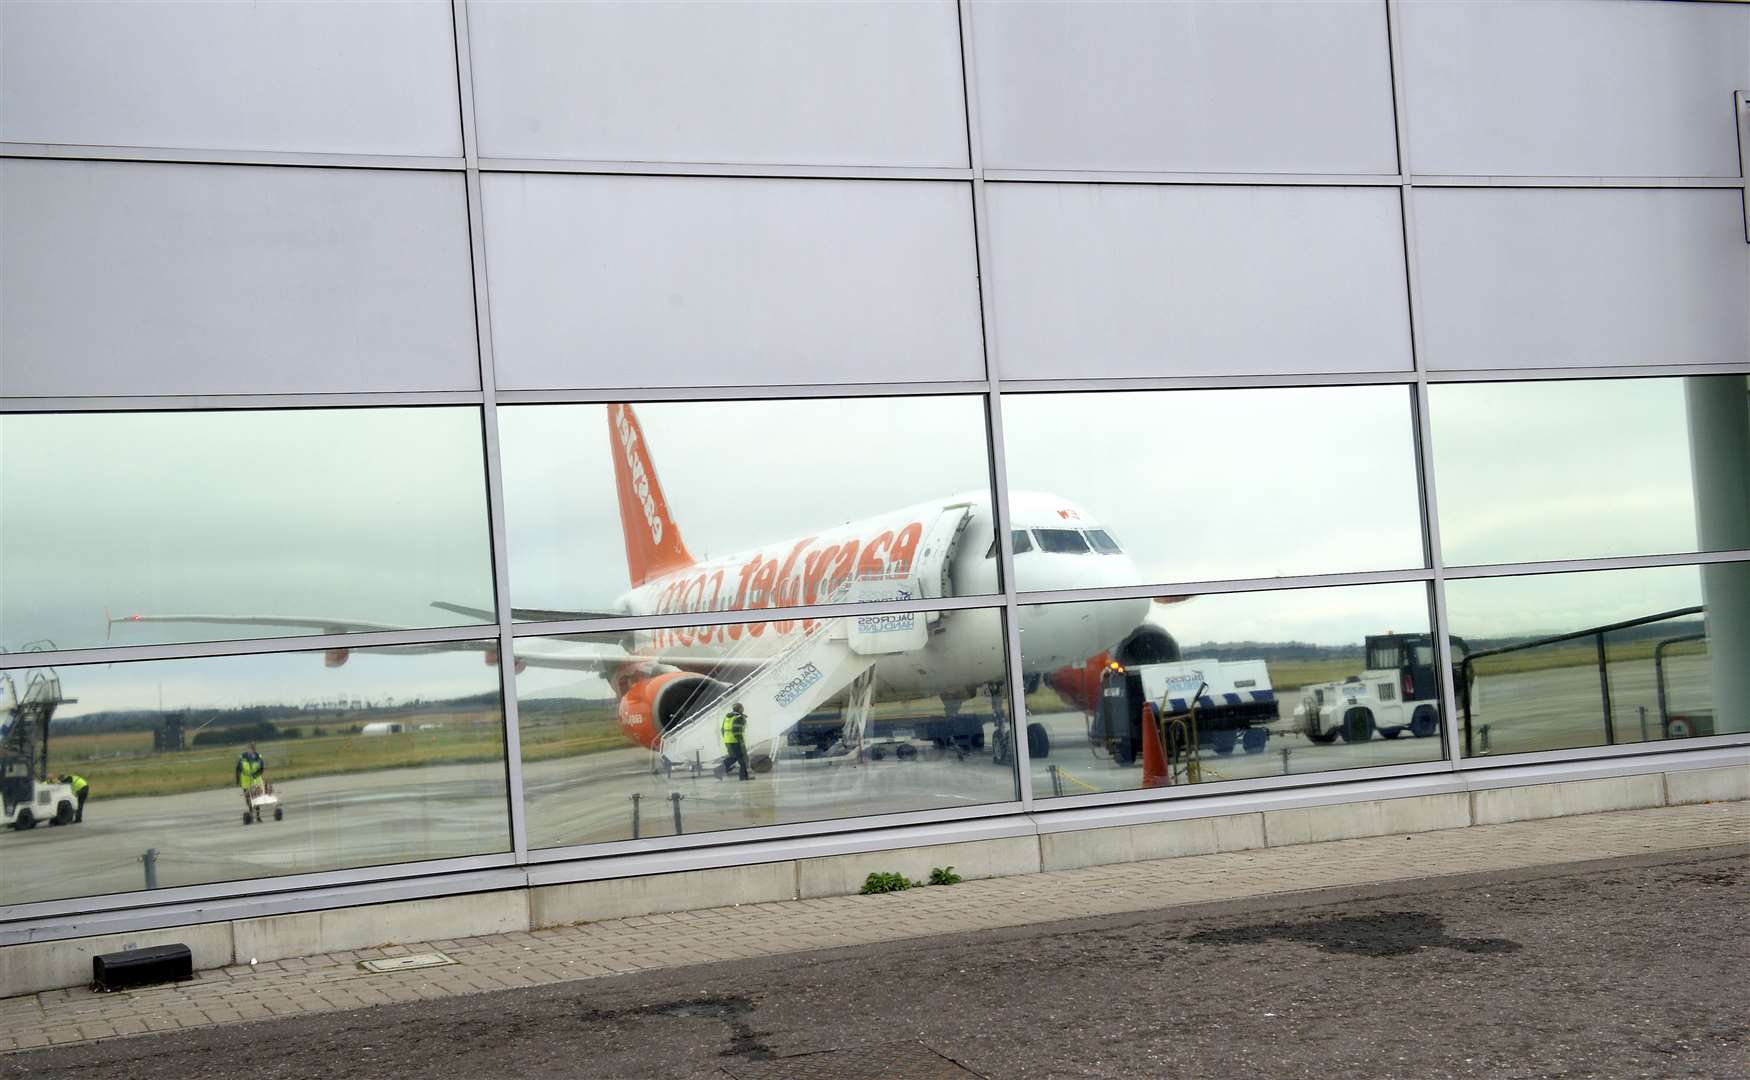 easyJet is still on course to resume its planned winter service from Inverness Airport next month, but a return to its normal timetable in the new year remains in doubt.